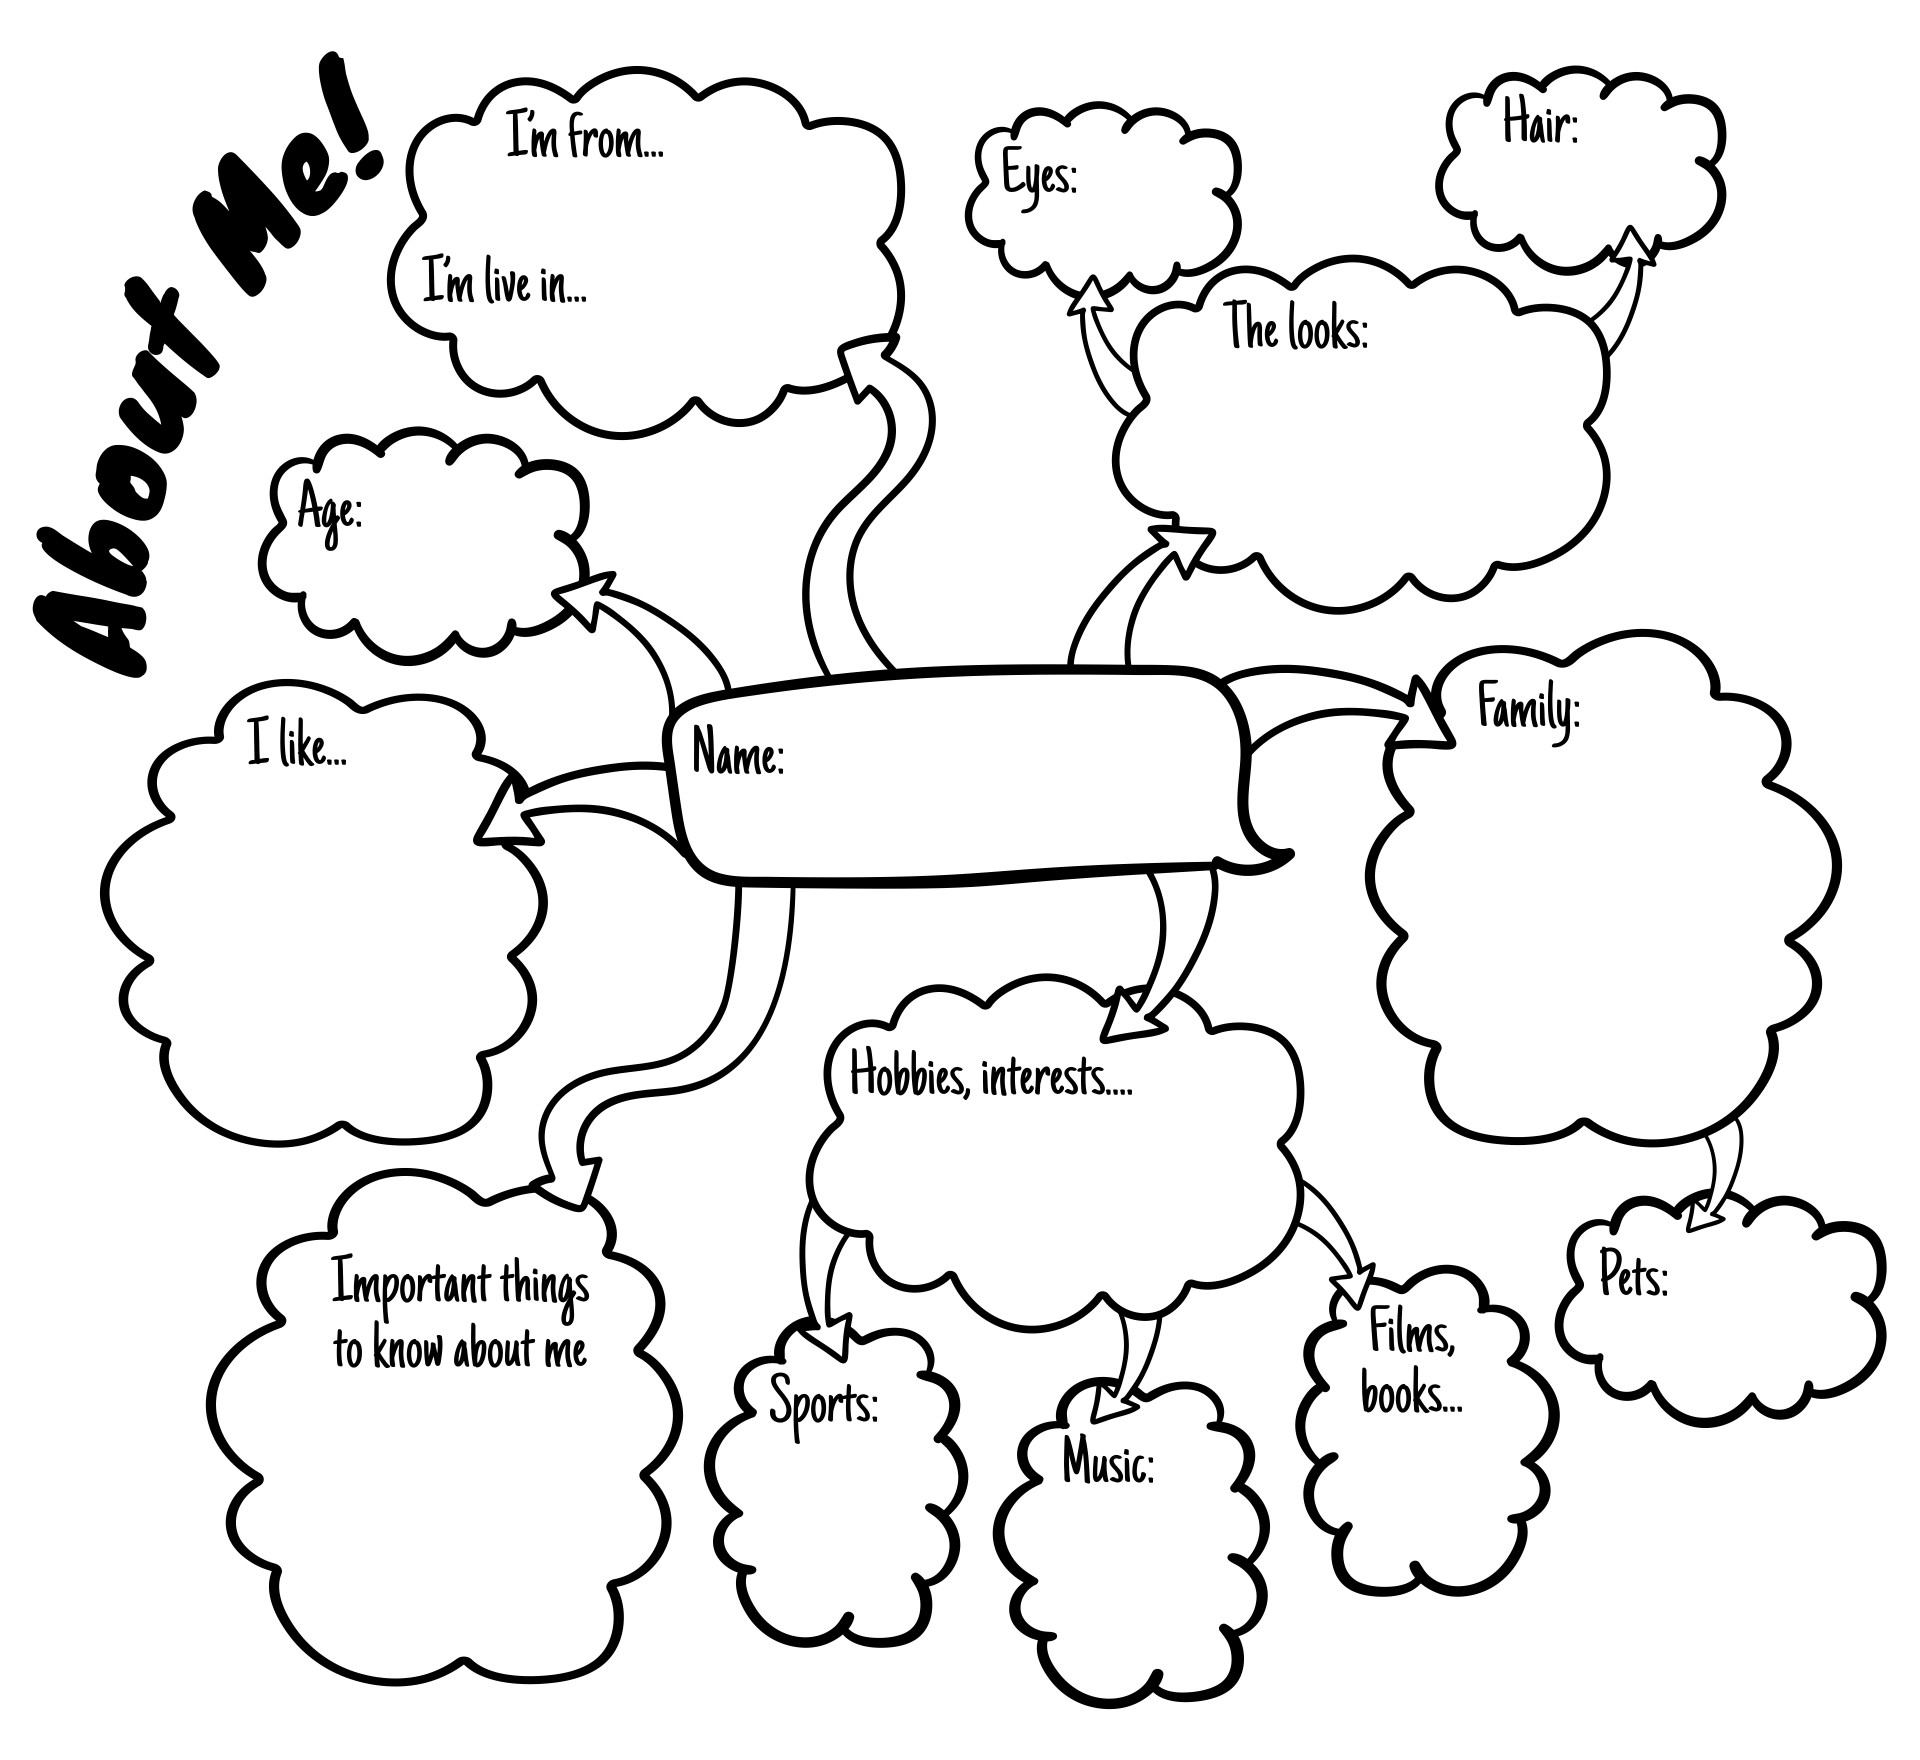 All About Myself Mind Map Worksheet